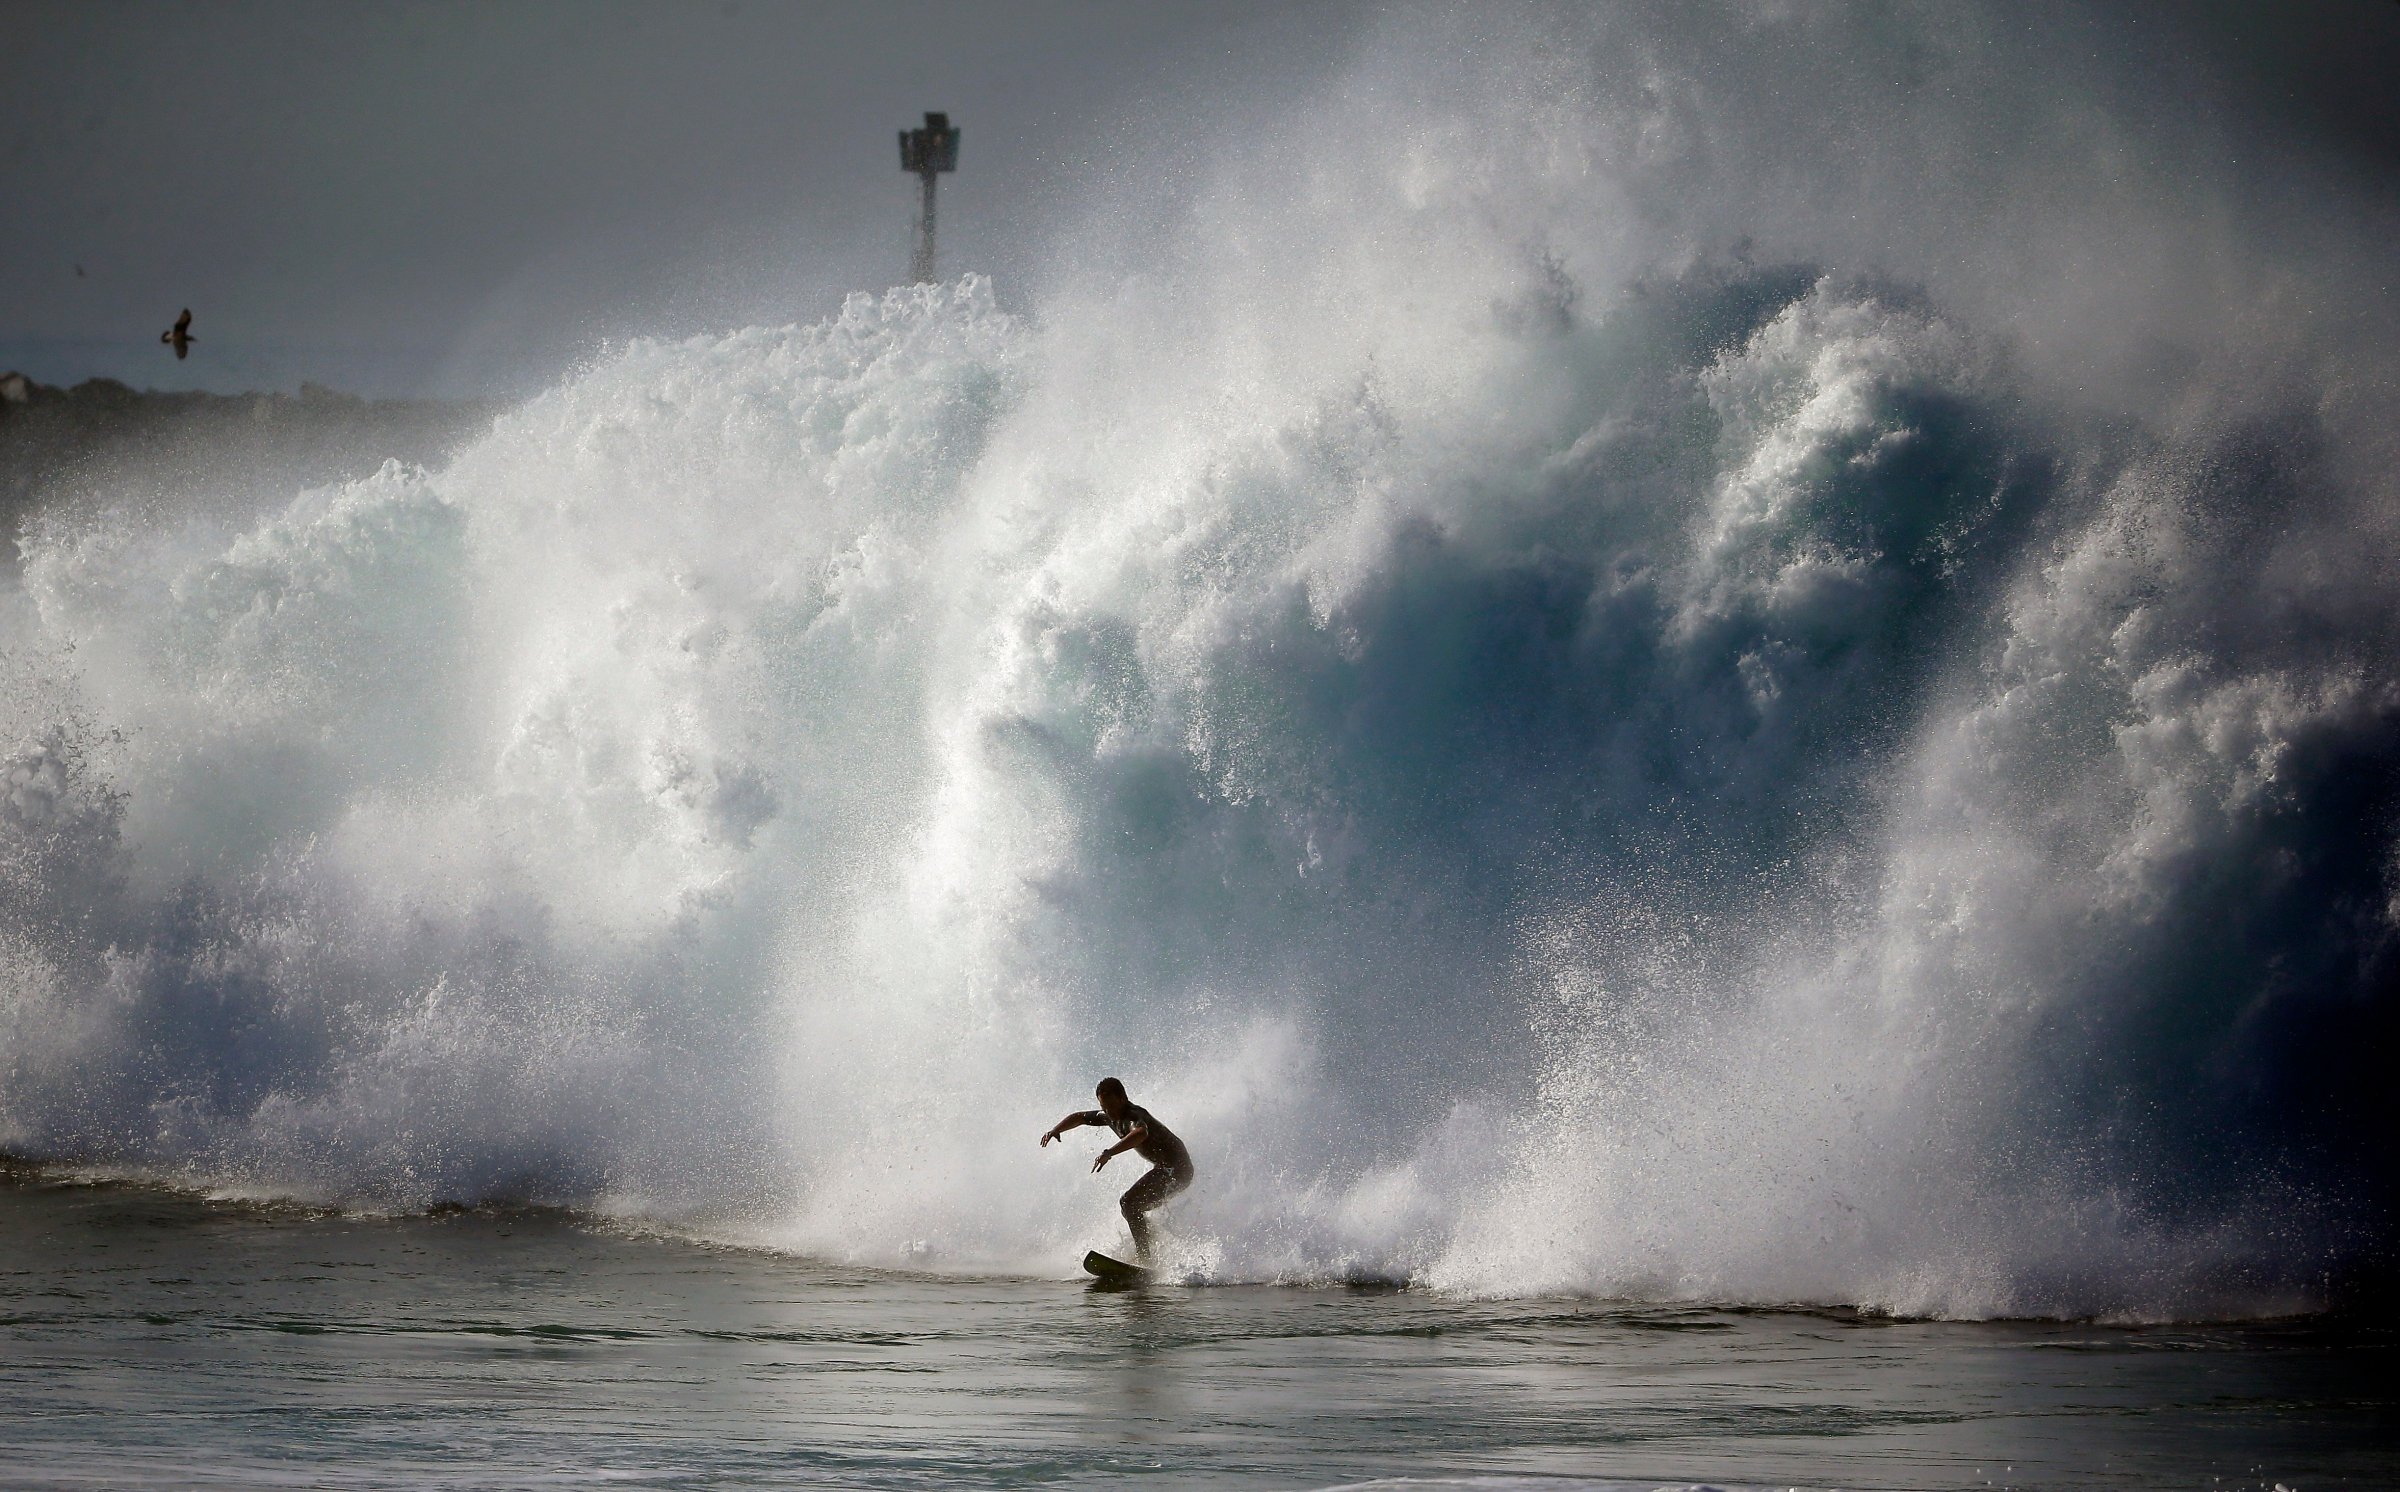 A surfer rides a wave at the wedge in Newport Beach, Calif. on Aug. 27, 2014. Southern California beachgoers experienced much higher than normal surf, brought on by Hurricane Marie spinning off the coast of Mexico.